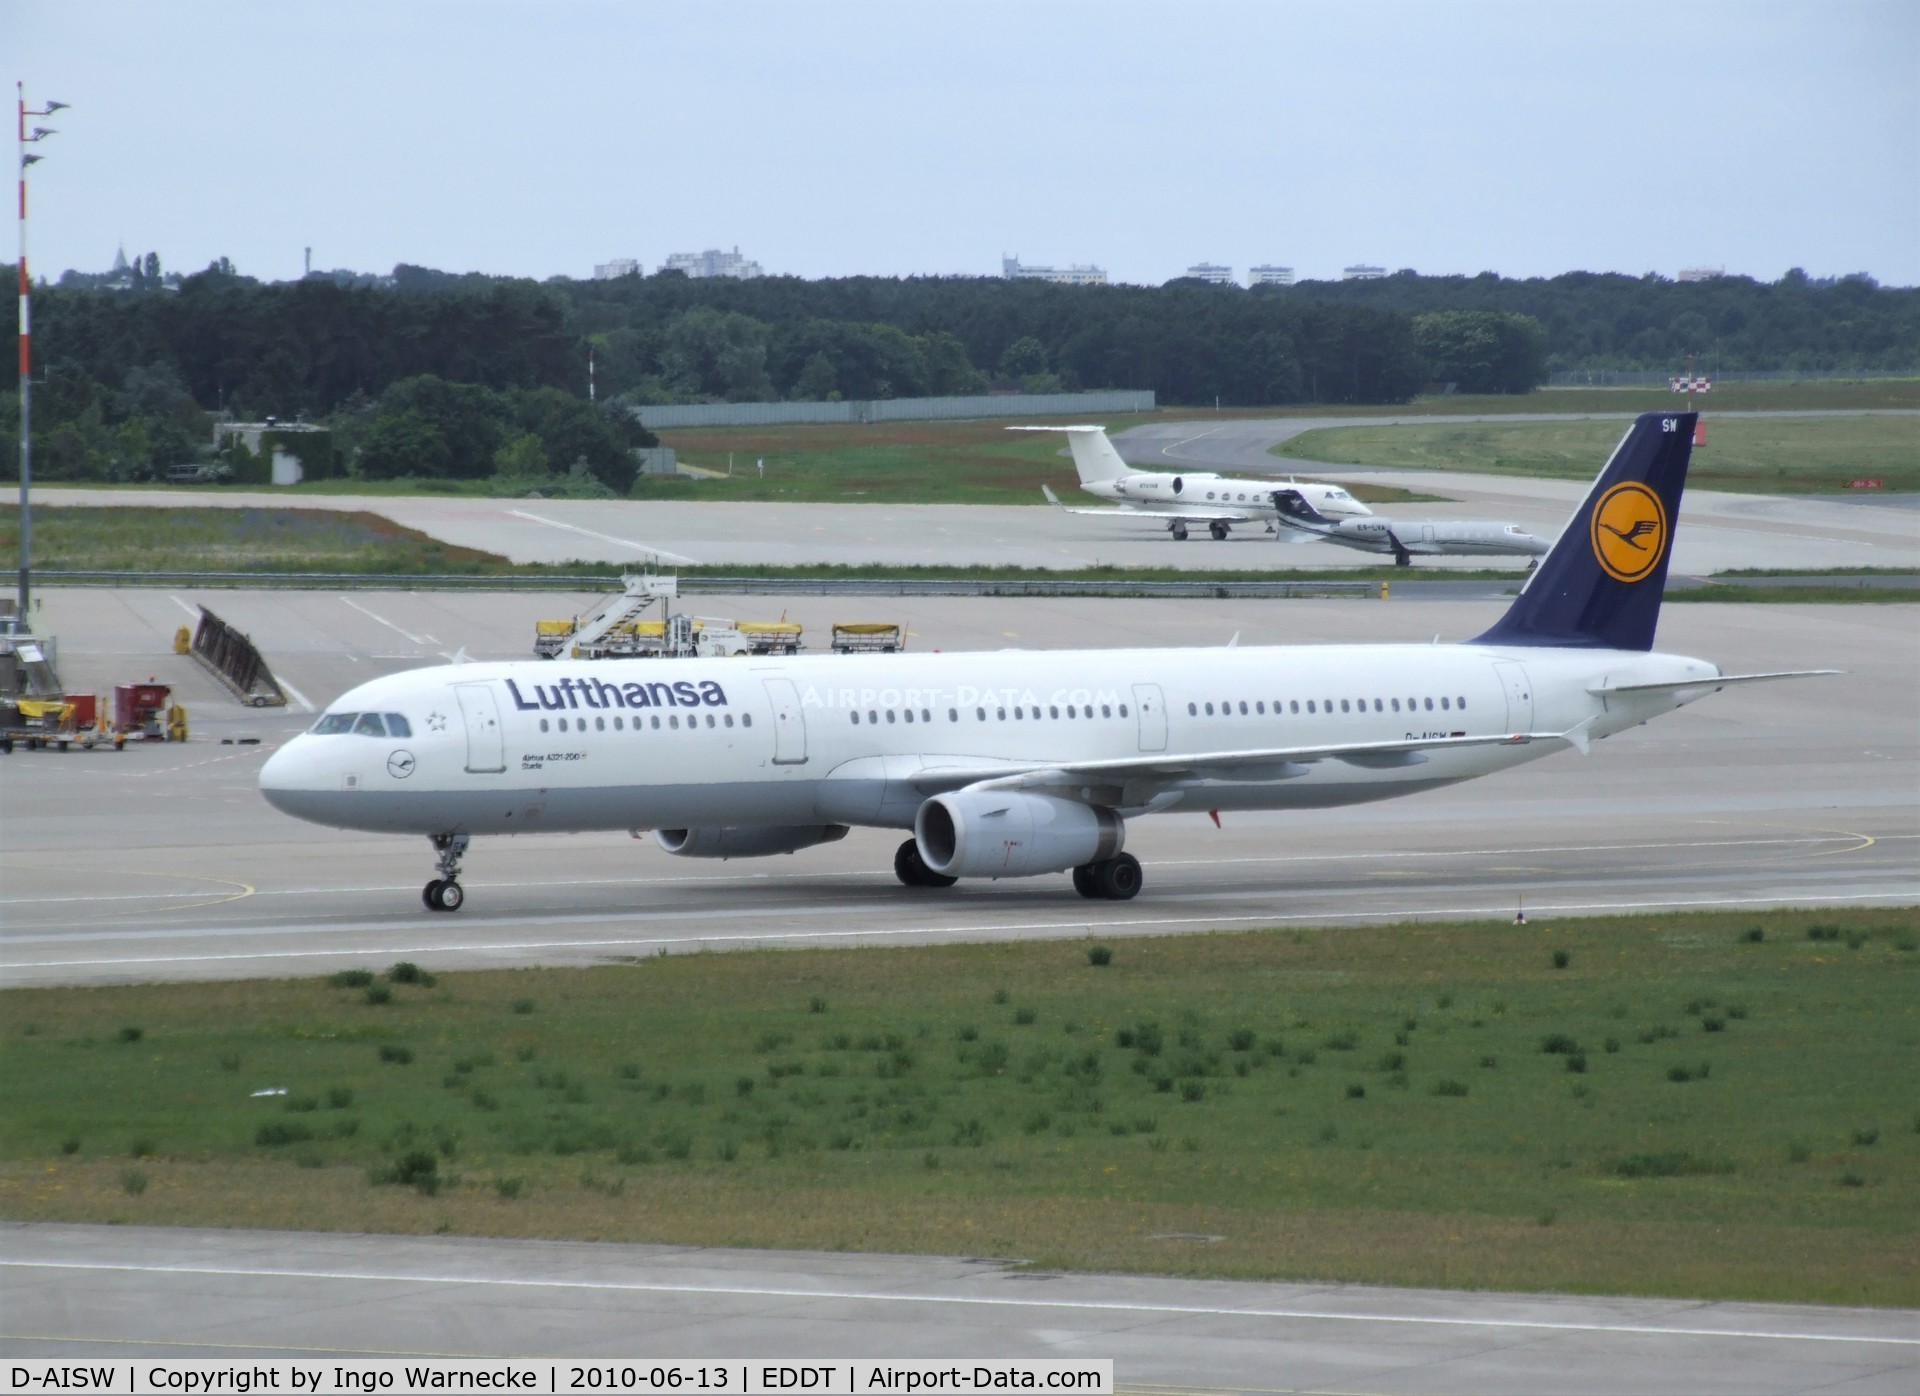 D-AISW, 2009 Airbus A321-231 C/N 4087, Airbus A321-231 of Lufthansa at Berlin/Tegel airport